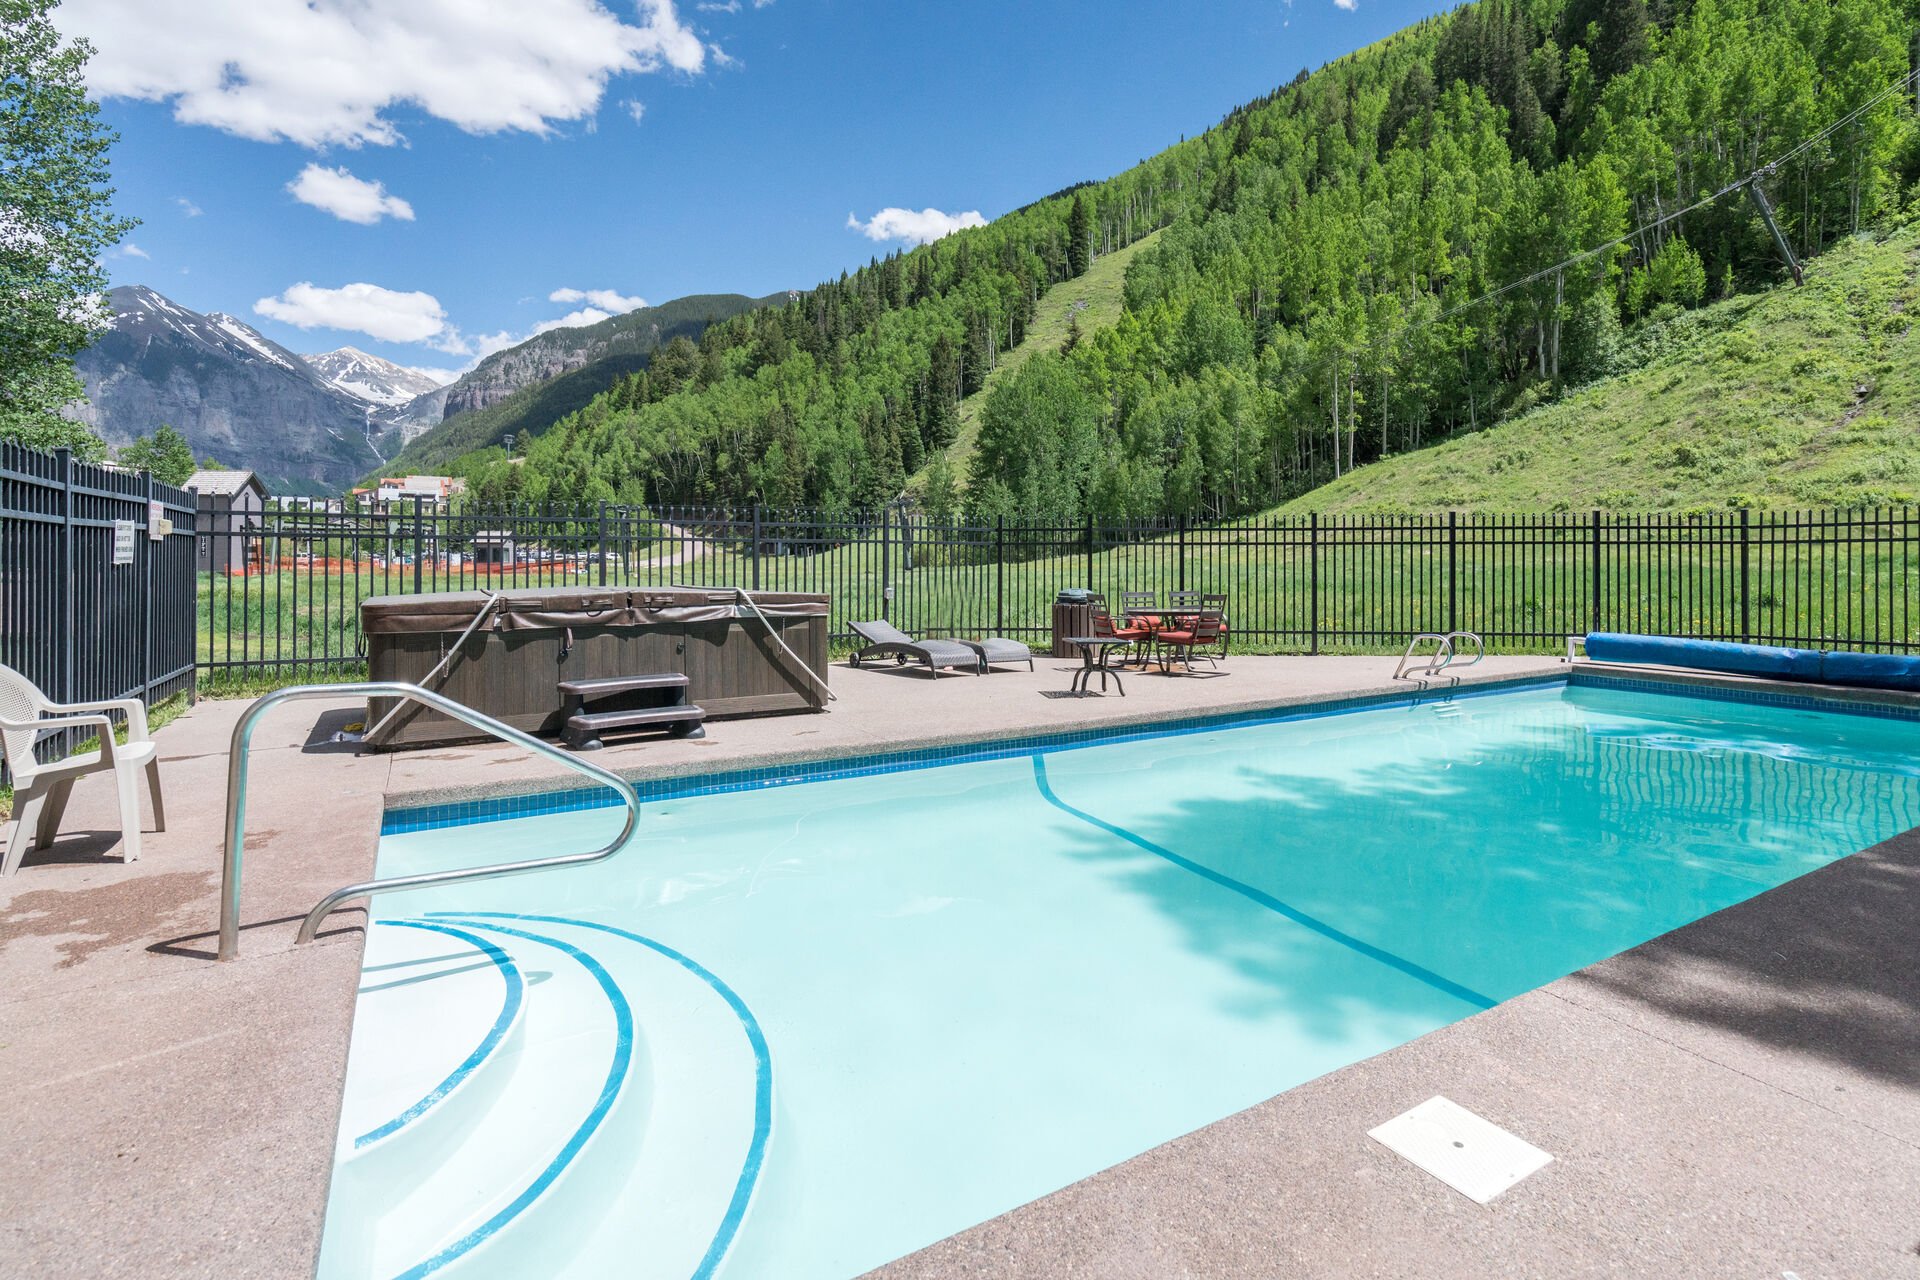 View of the Pool and Hot tub